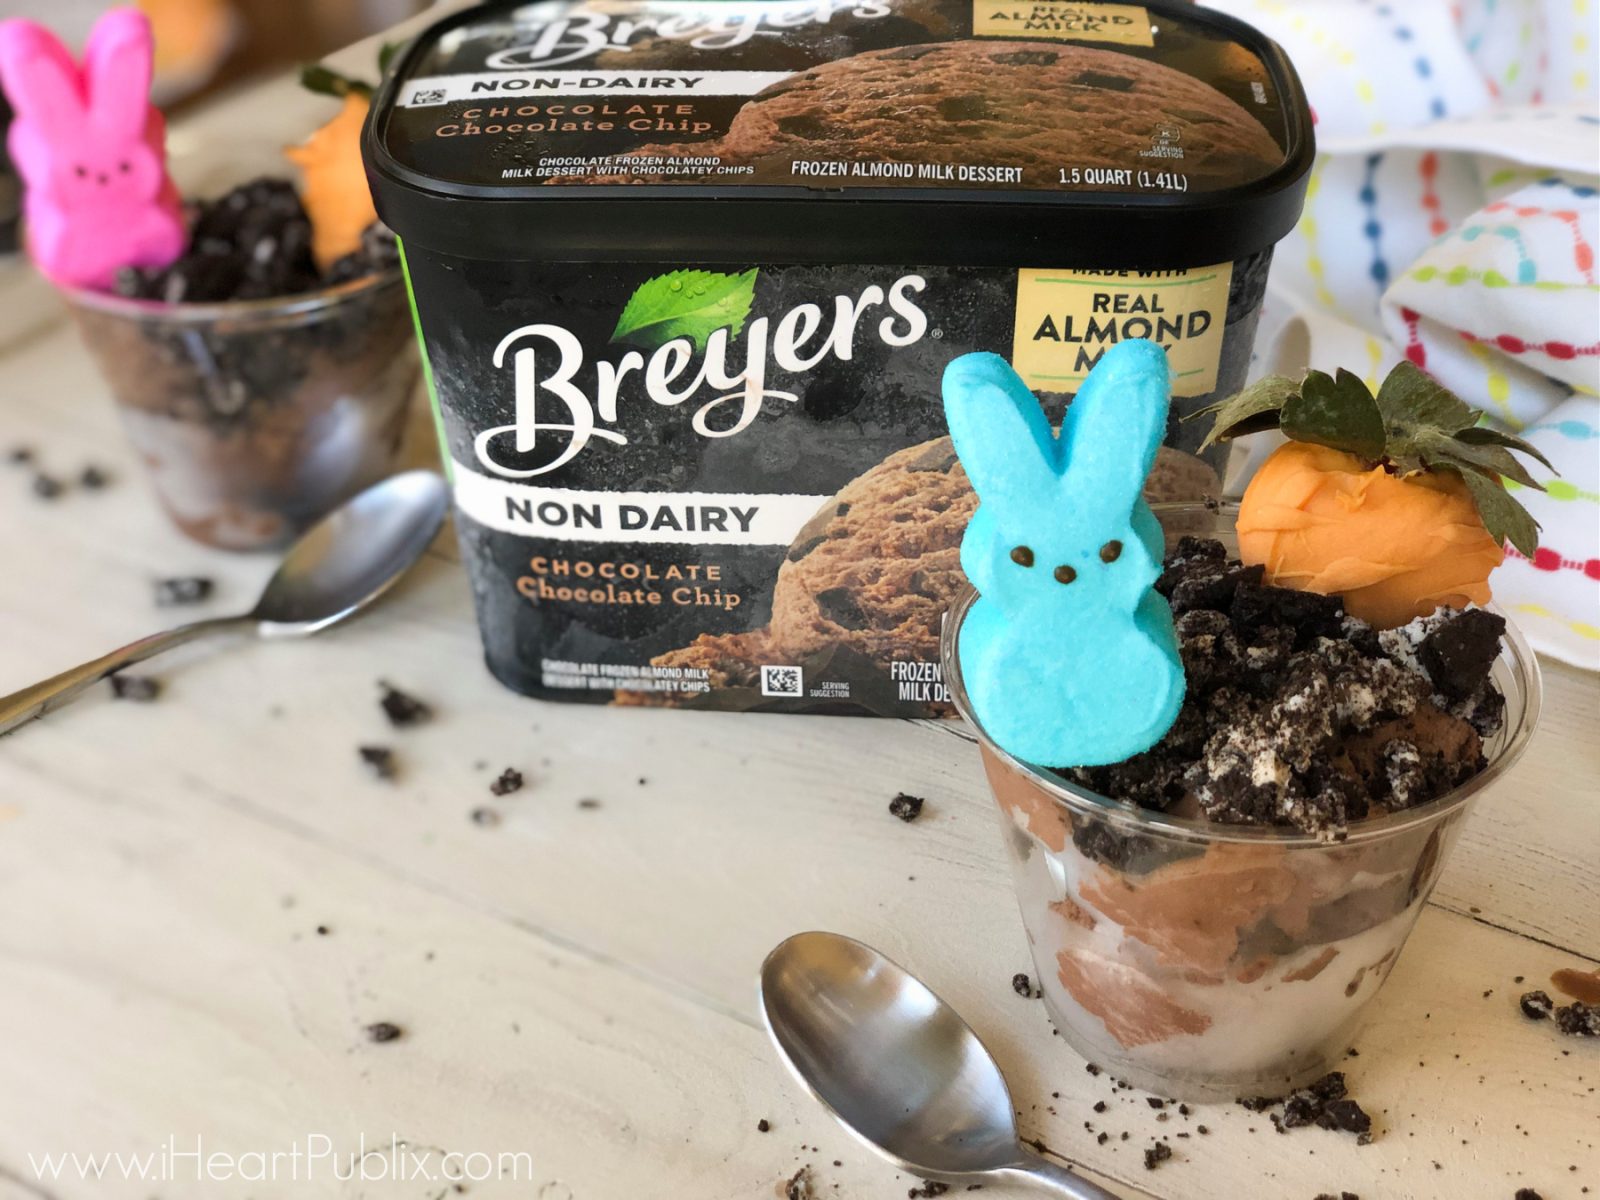 Clip Your Breyers Coupon And Serve Up My Carrot Patch Sundae Cups